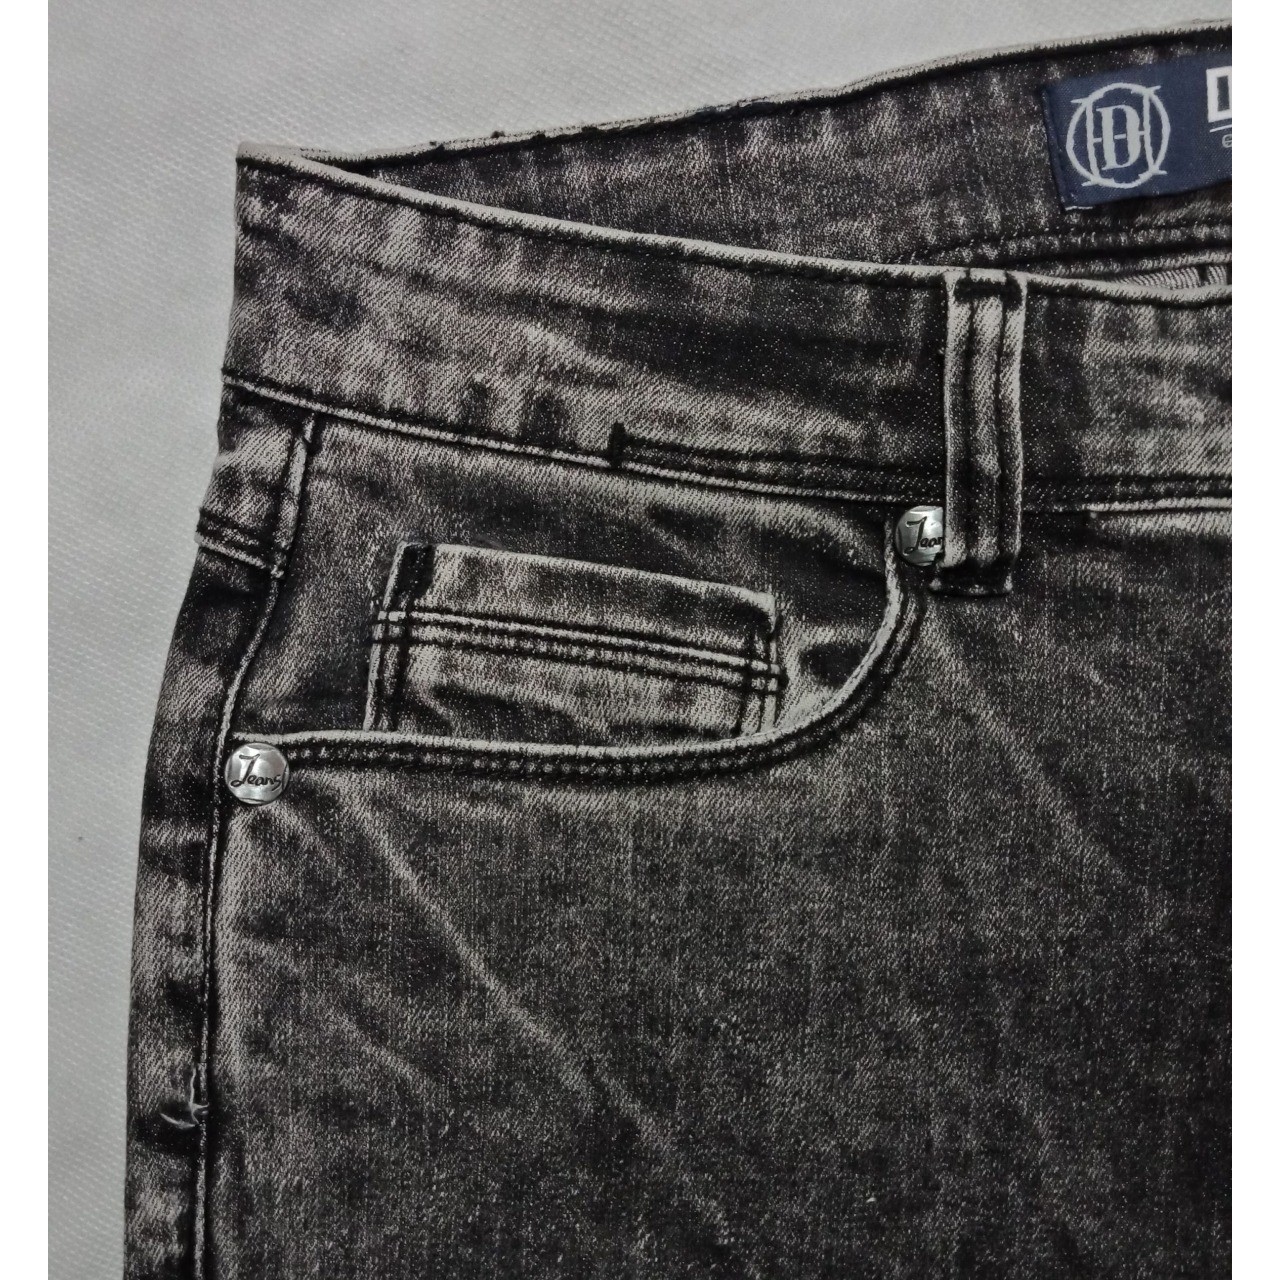 Charcoal Grey Wash Datch Genuine Stretch Export Quality Jeans